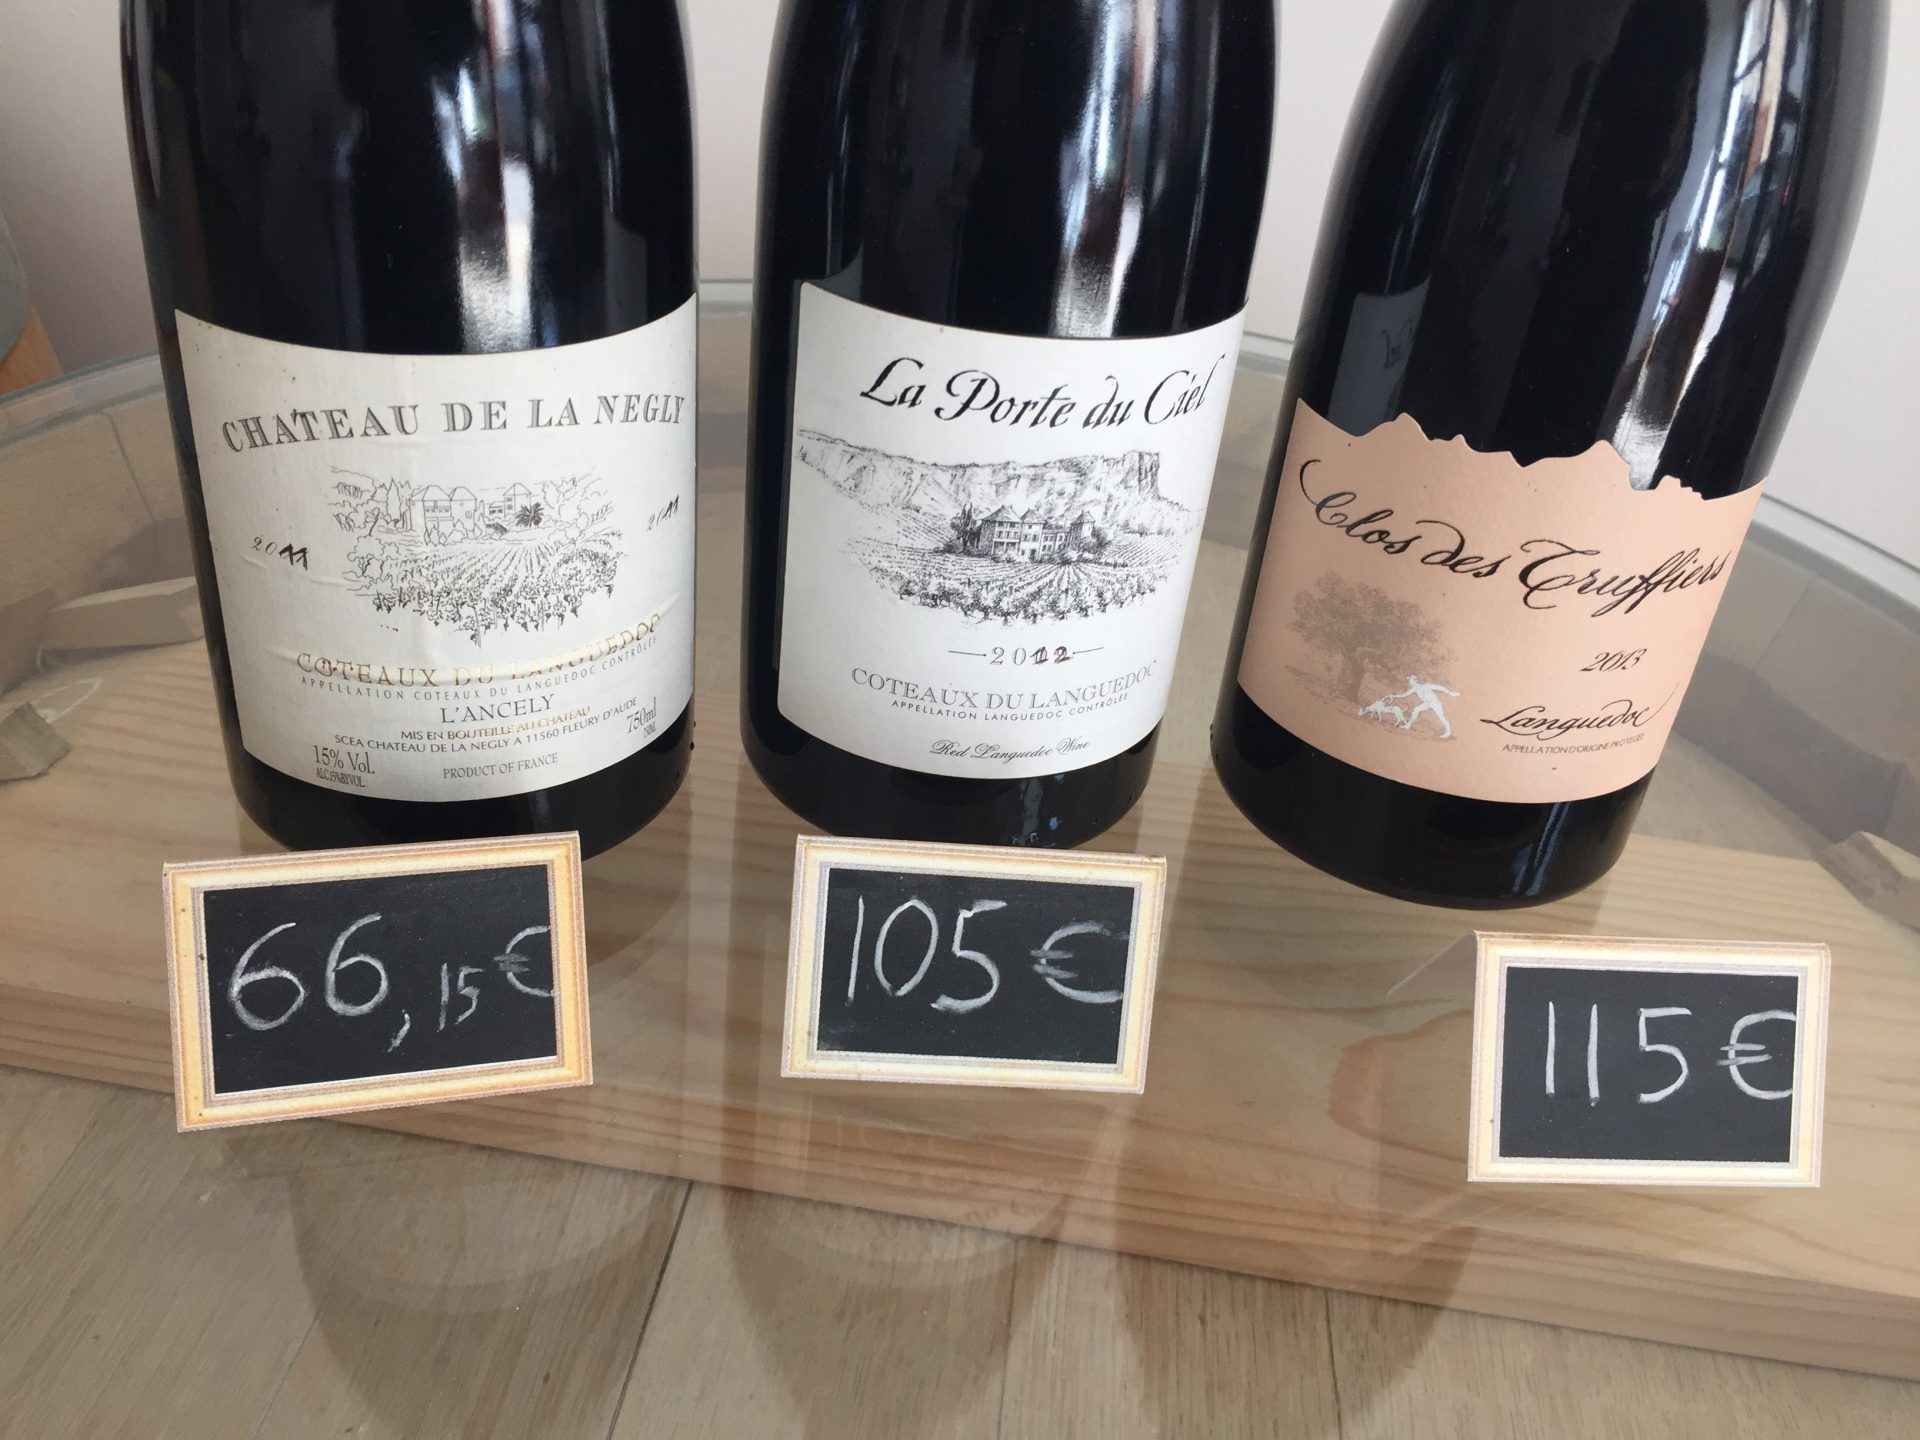 Some top notch wines from Château Nagly, La Clape. Great stuff.